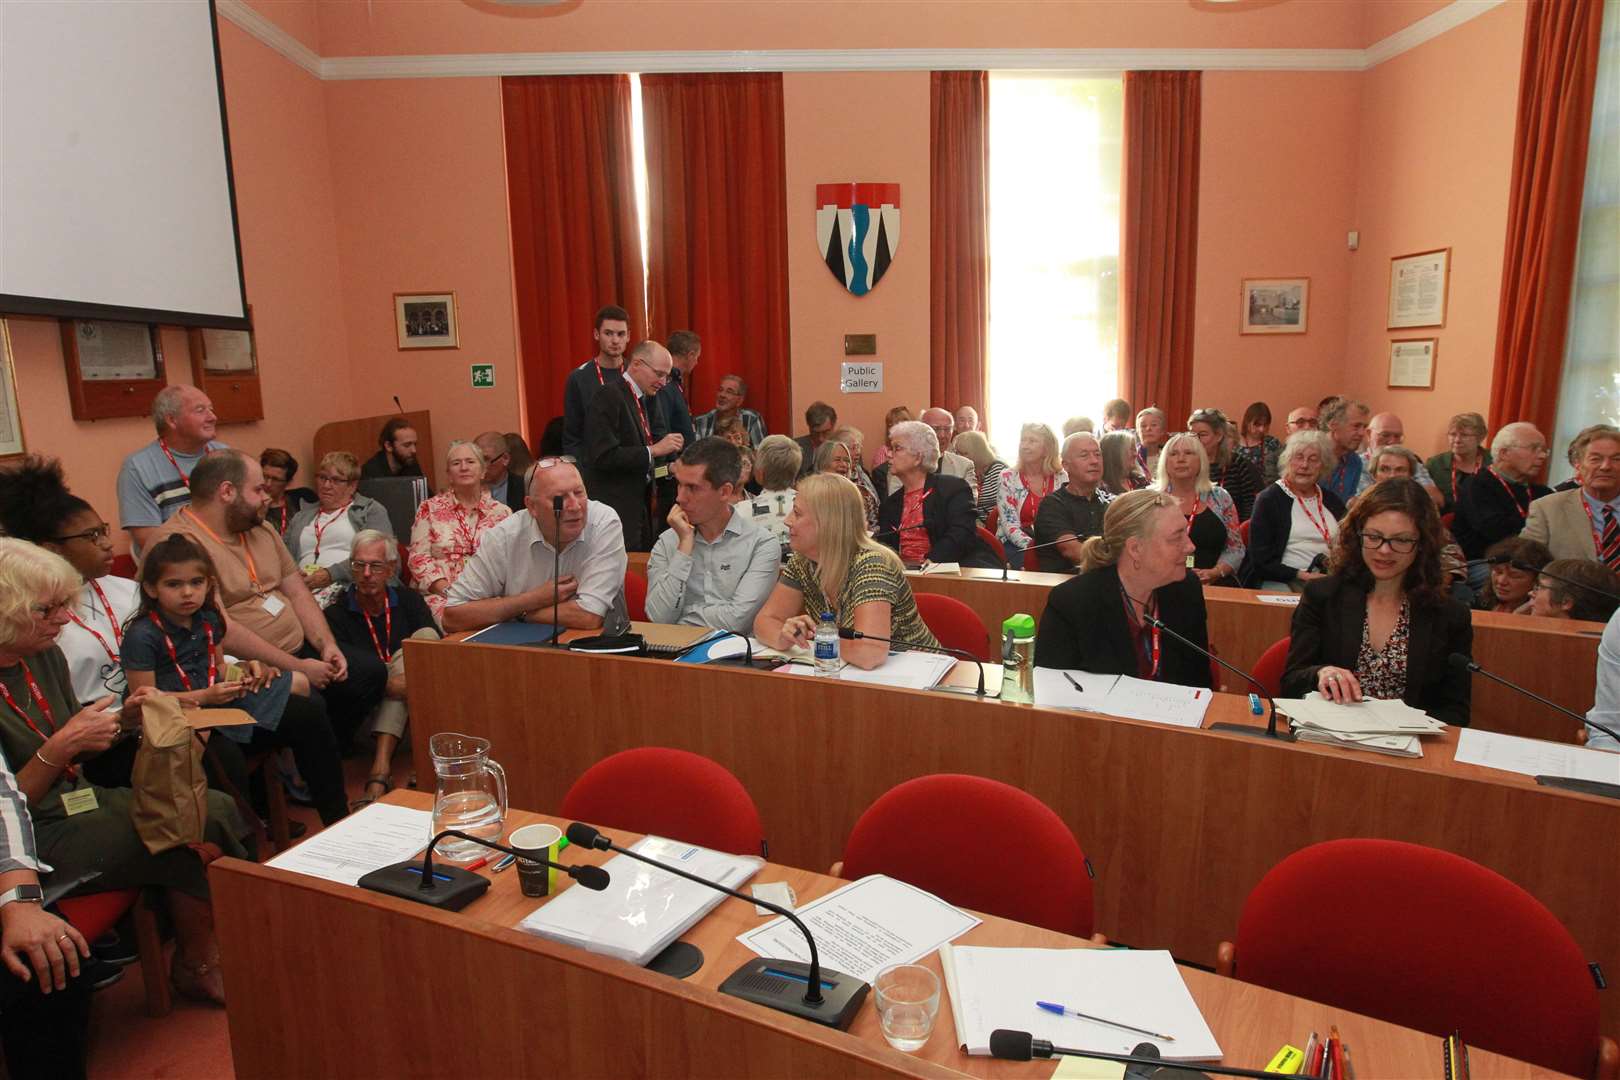 A scene from the planning inquiry